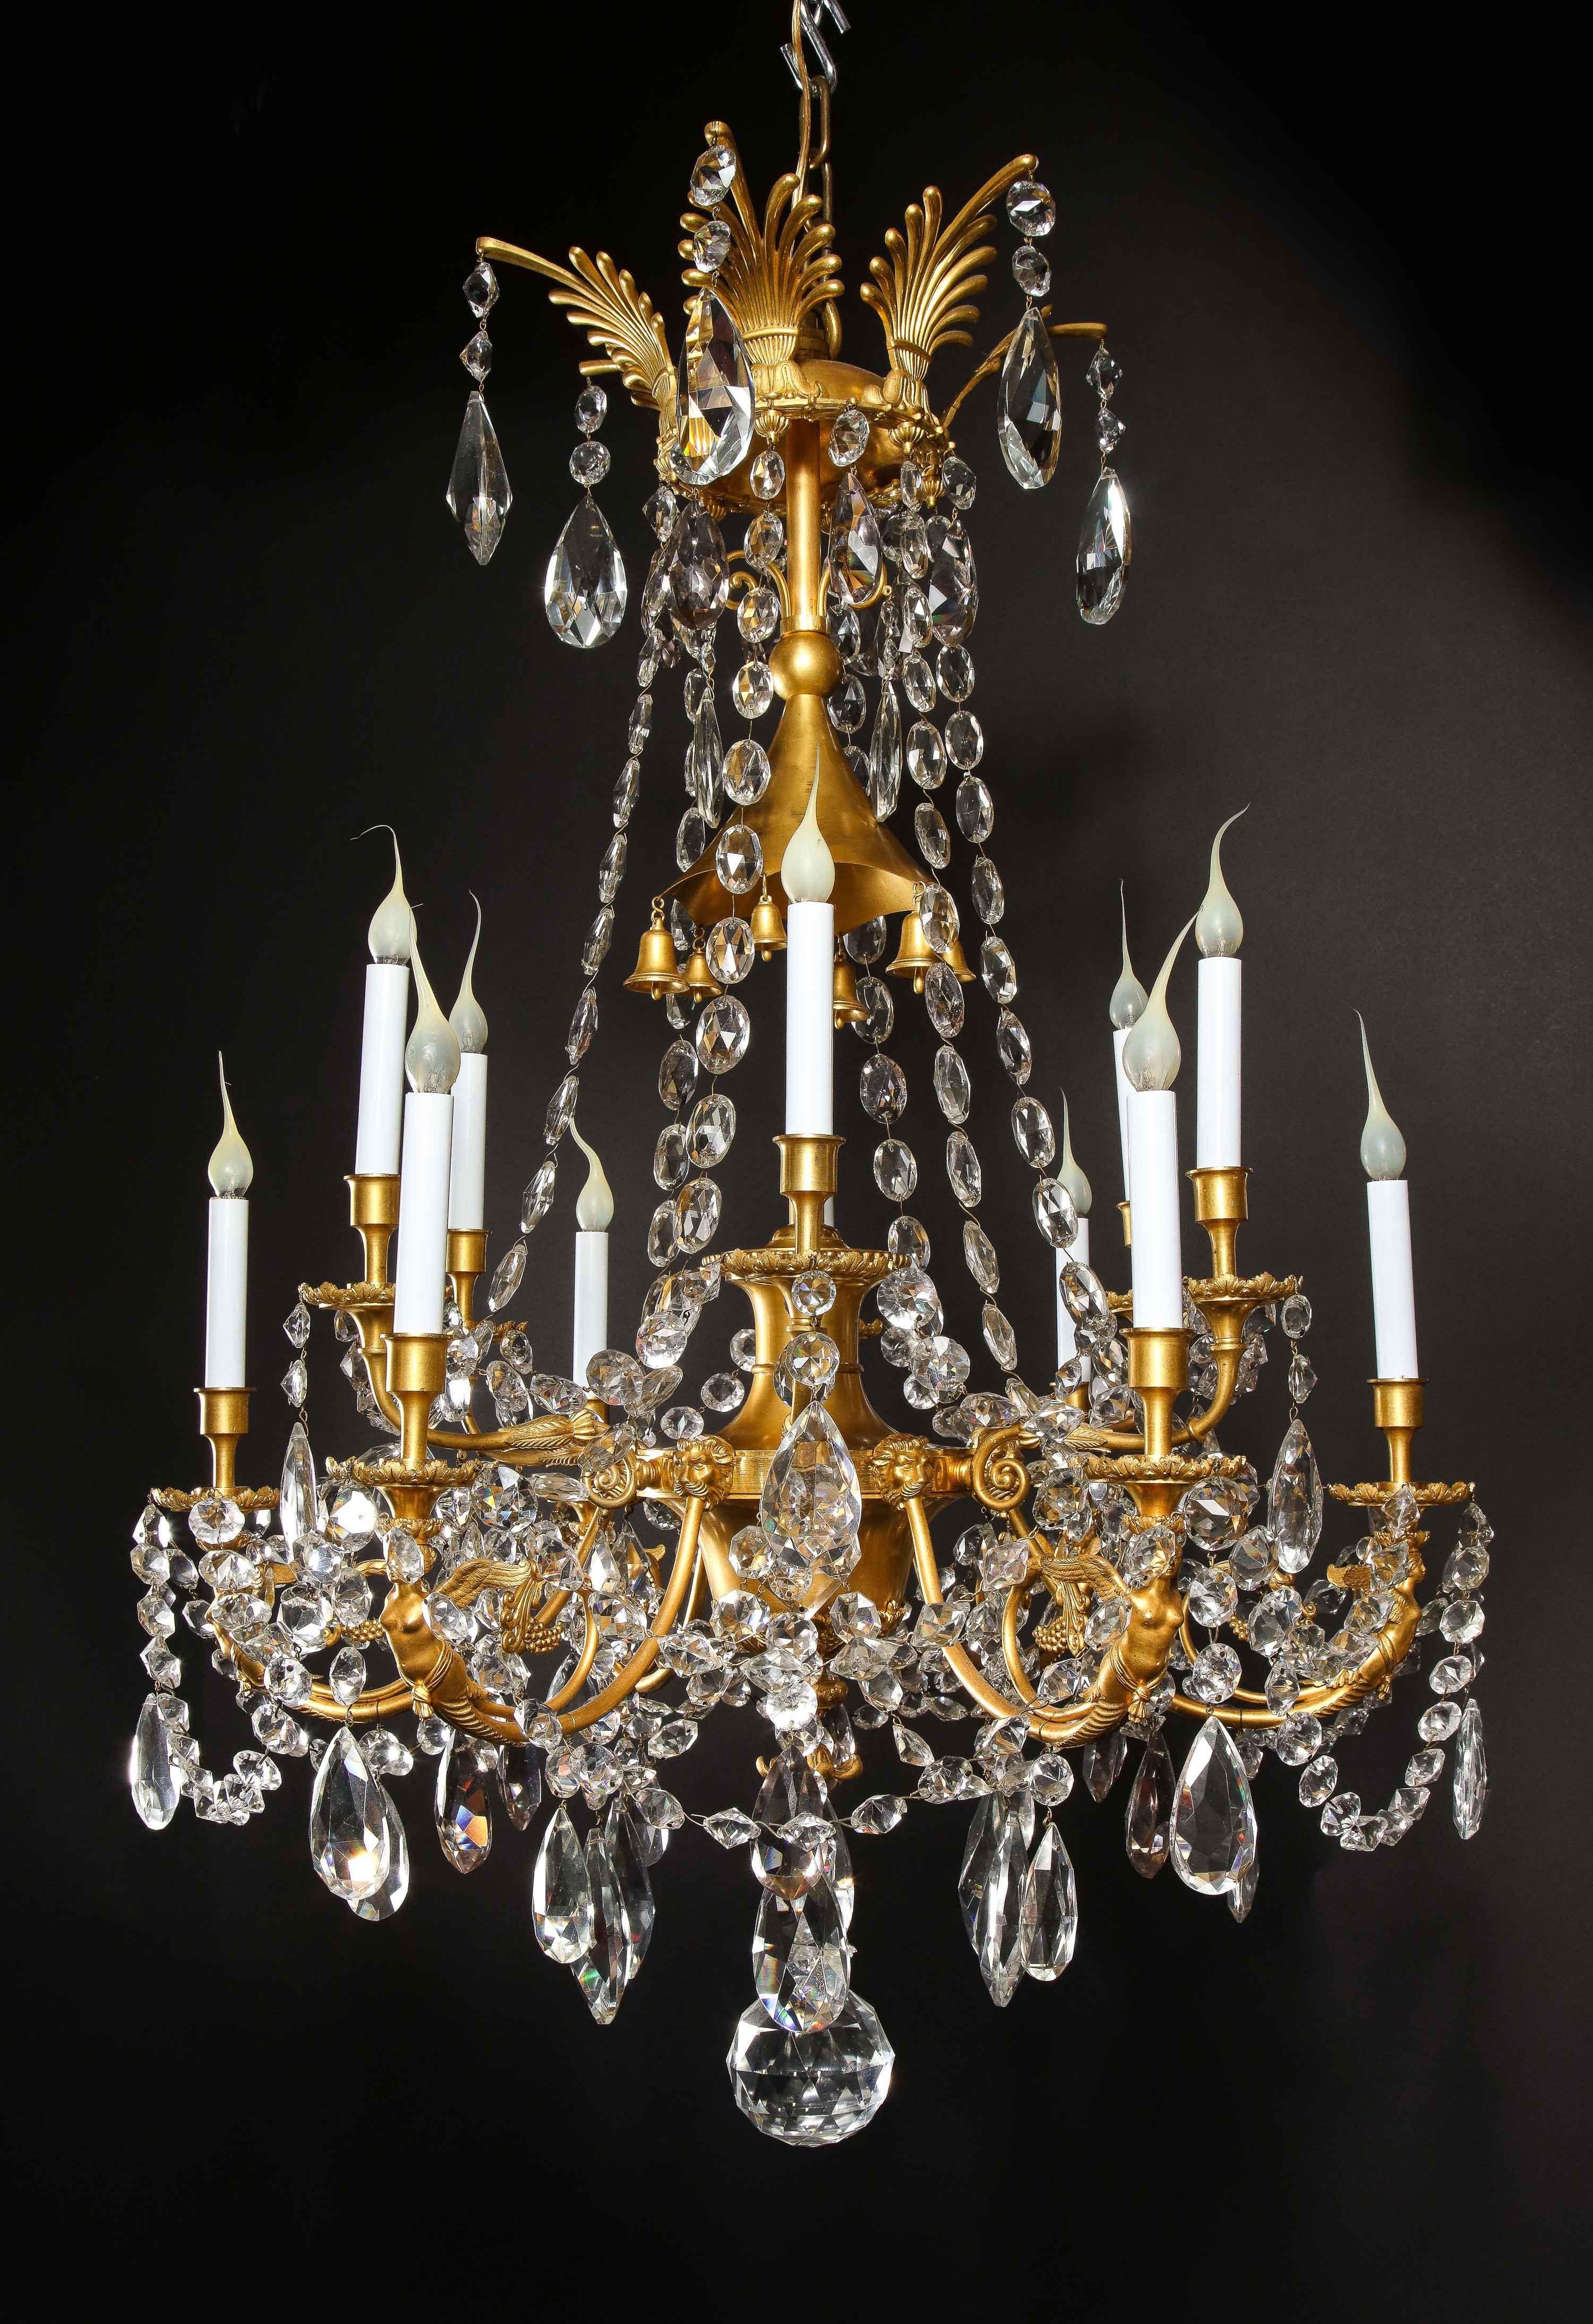 19th Century Spectacular Antique French Louis XVI Style Gilt Bronze and Crystal Chandelier For Sale